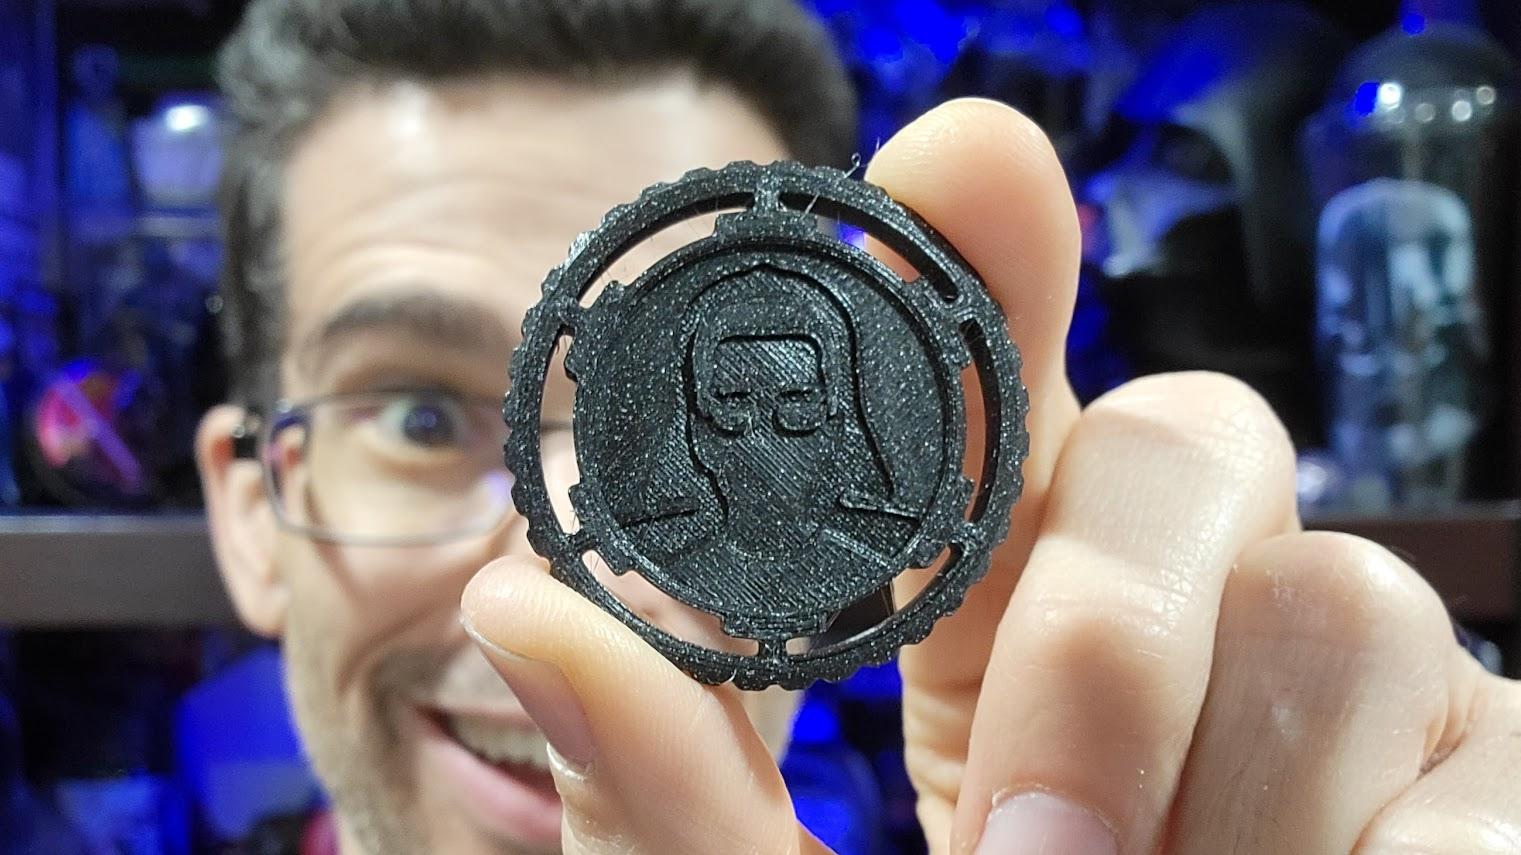 Chris Pirillo's Darth Vader Empire Star Wars Inspired Creator (Maker) Coin Collection 3d model